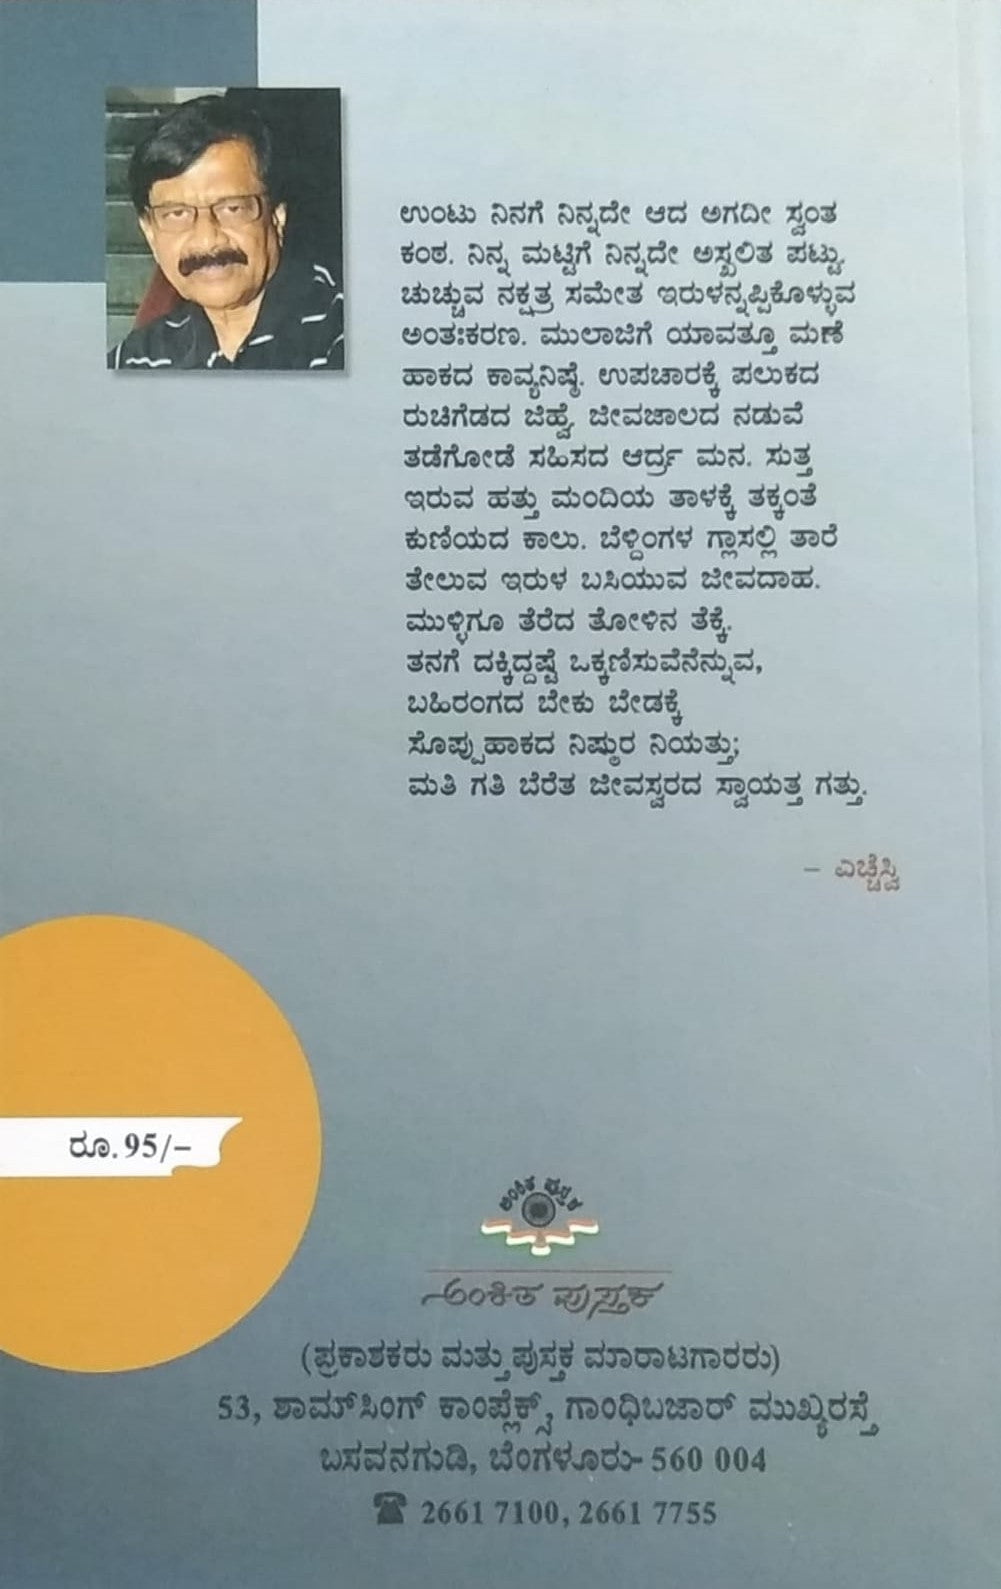 Title : Nanna Mattige is a book with Collection of Poems which is Written by B. R. Lakshmanrao and Published by Ankita Pustaka